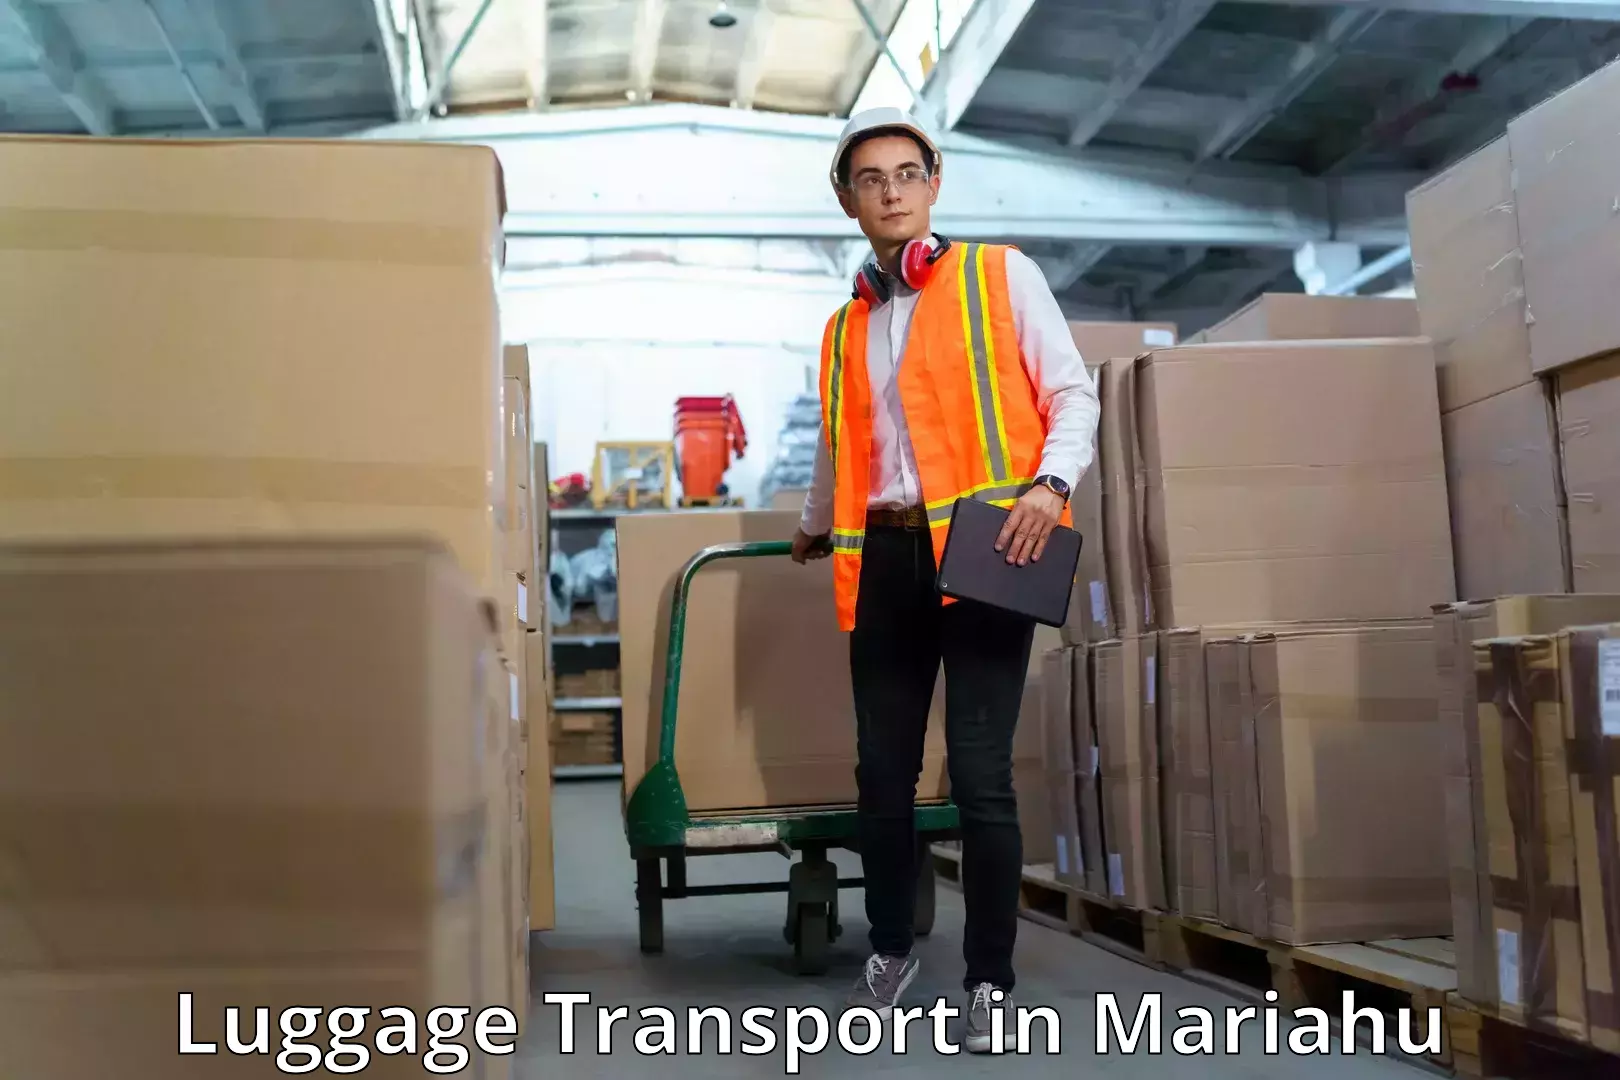 Luggage shipping planner in Mariahu